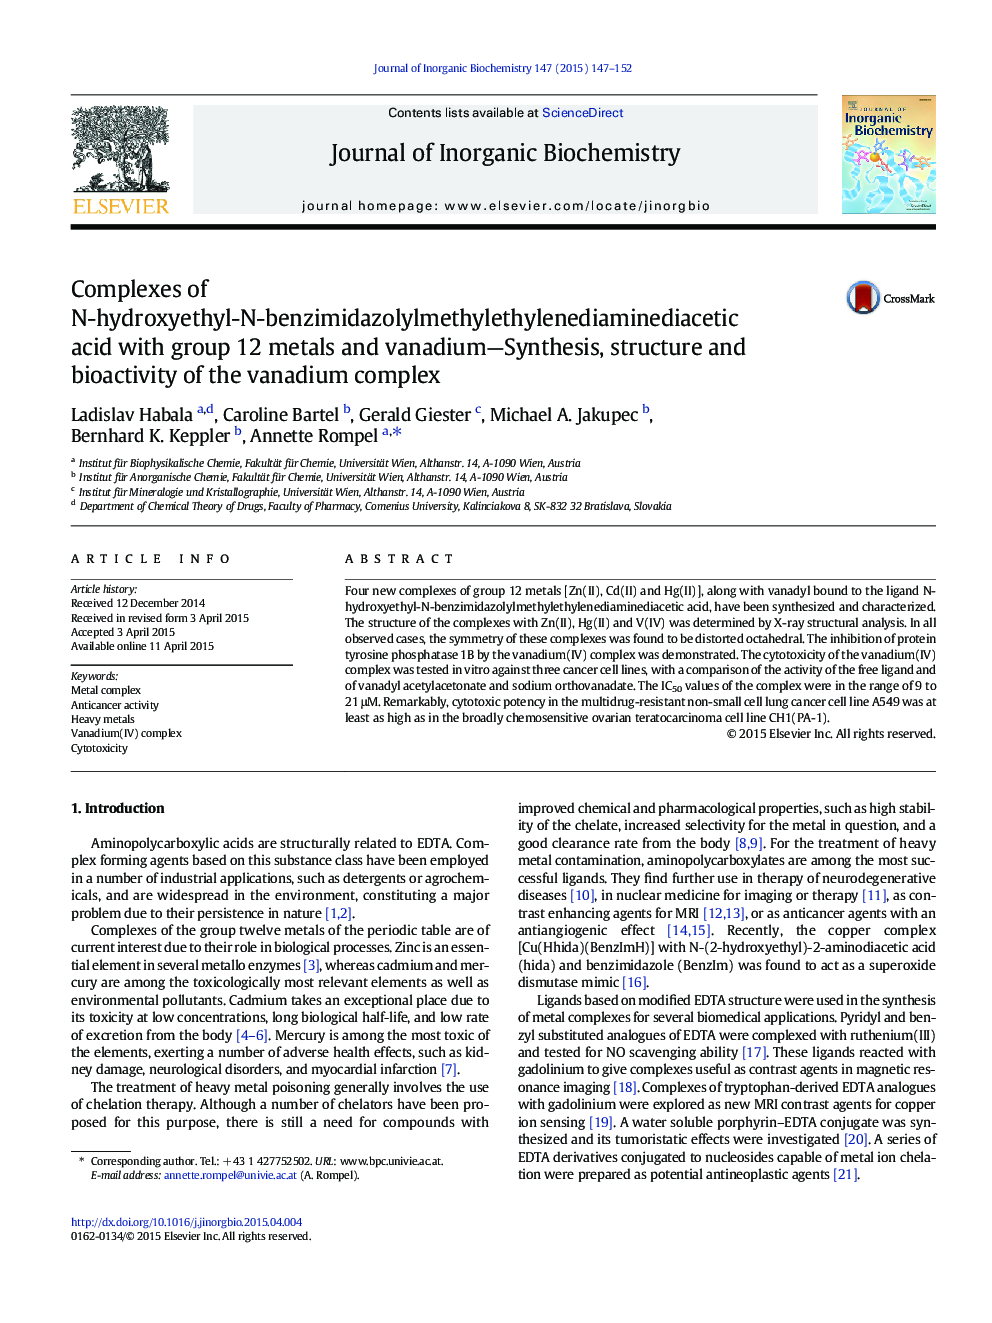 Complexes of N-hydroxyethyl-N-benzimidazolylmethylethylenediaminediacetic acid with group 12 metals and vanadium—Synthesis, structure and bioactivity of the vanadium complex